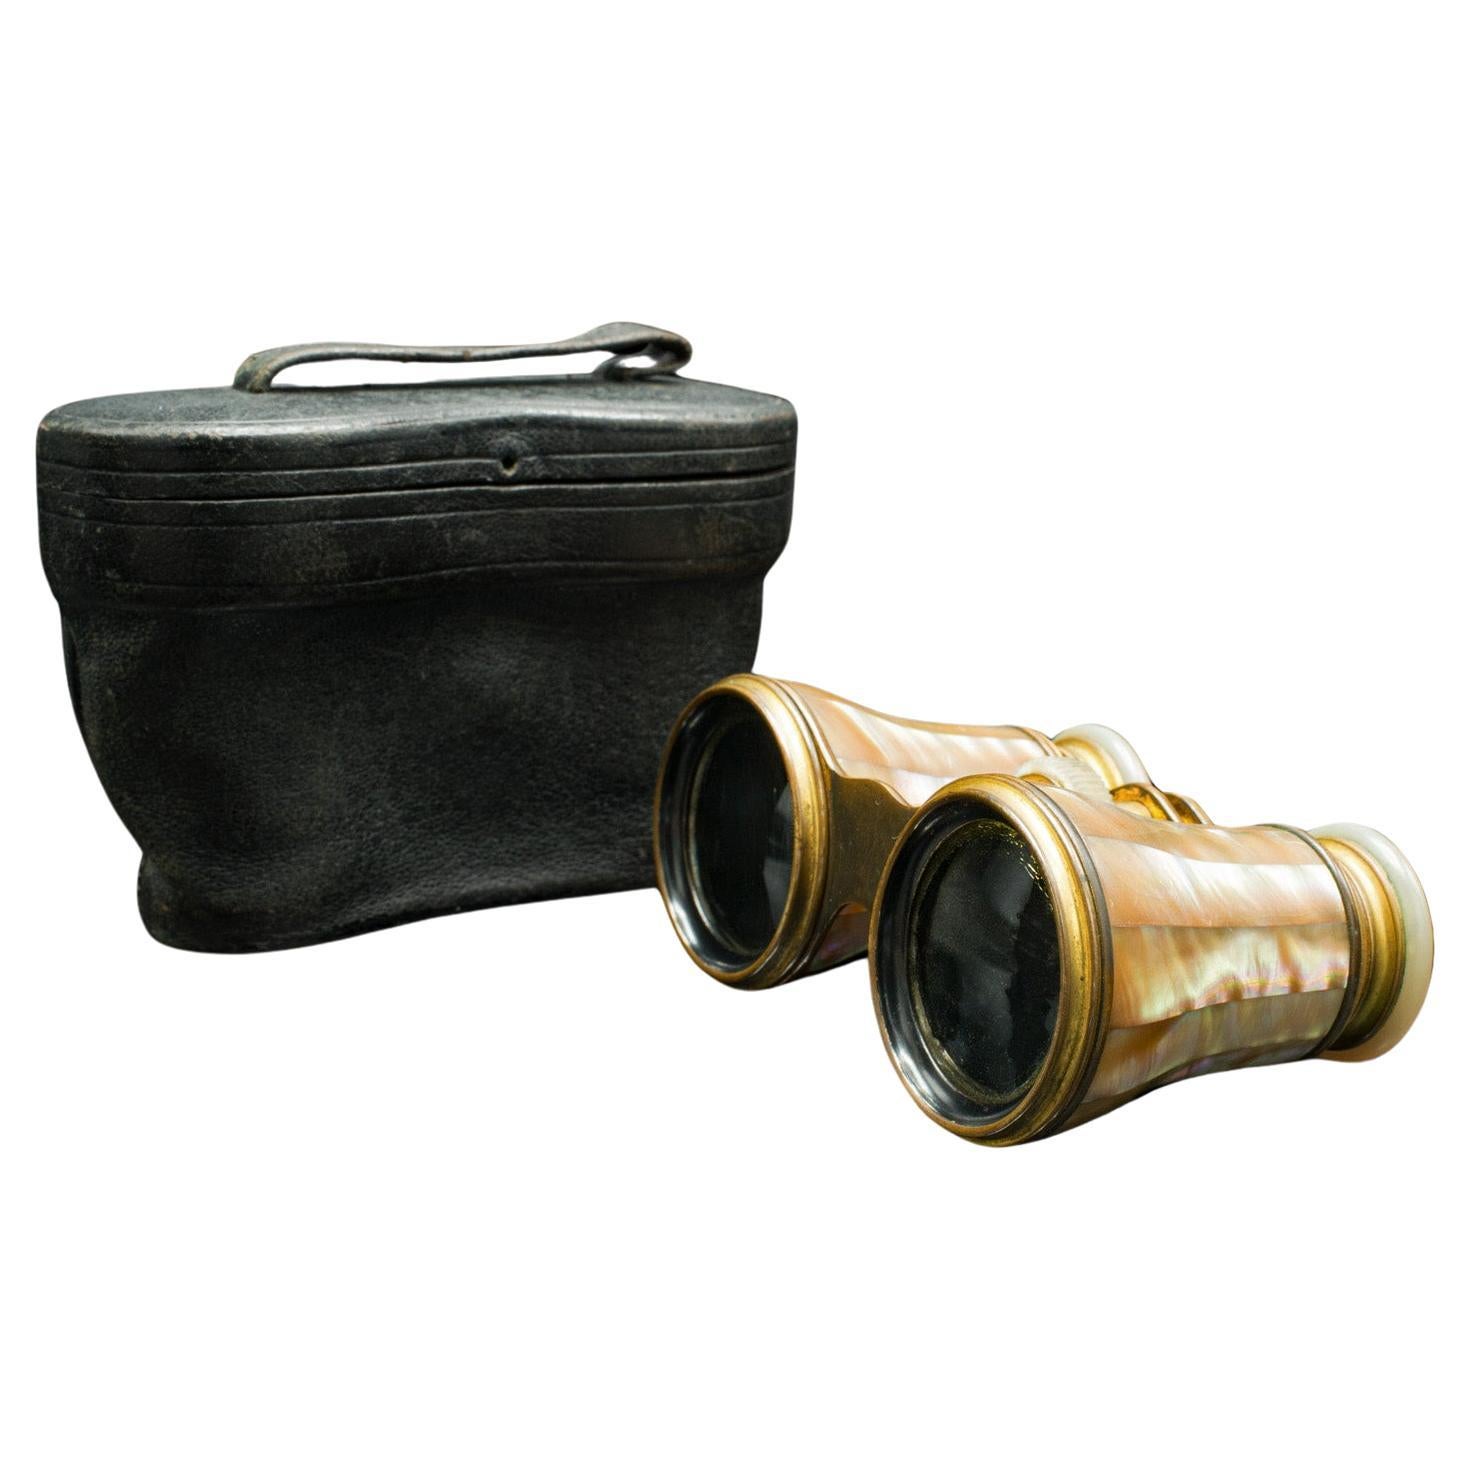 Pair Of Vintage Cased Opera Glasses, French, Brass, Binocular, Mid 20th Century For Sale